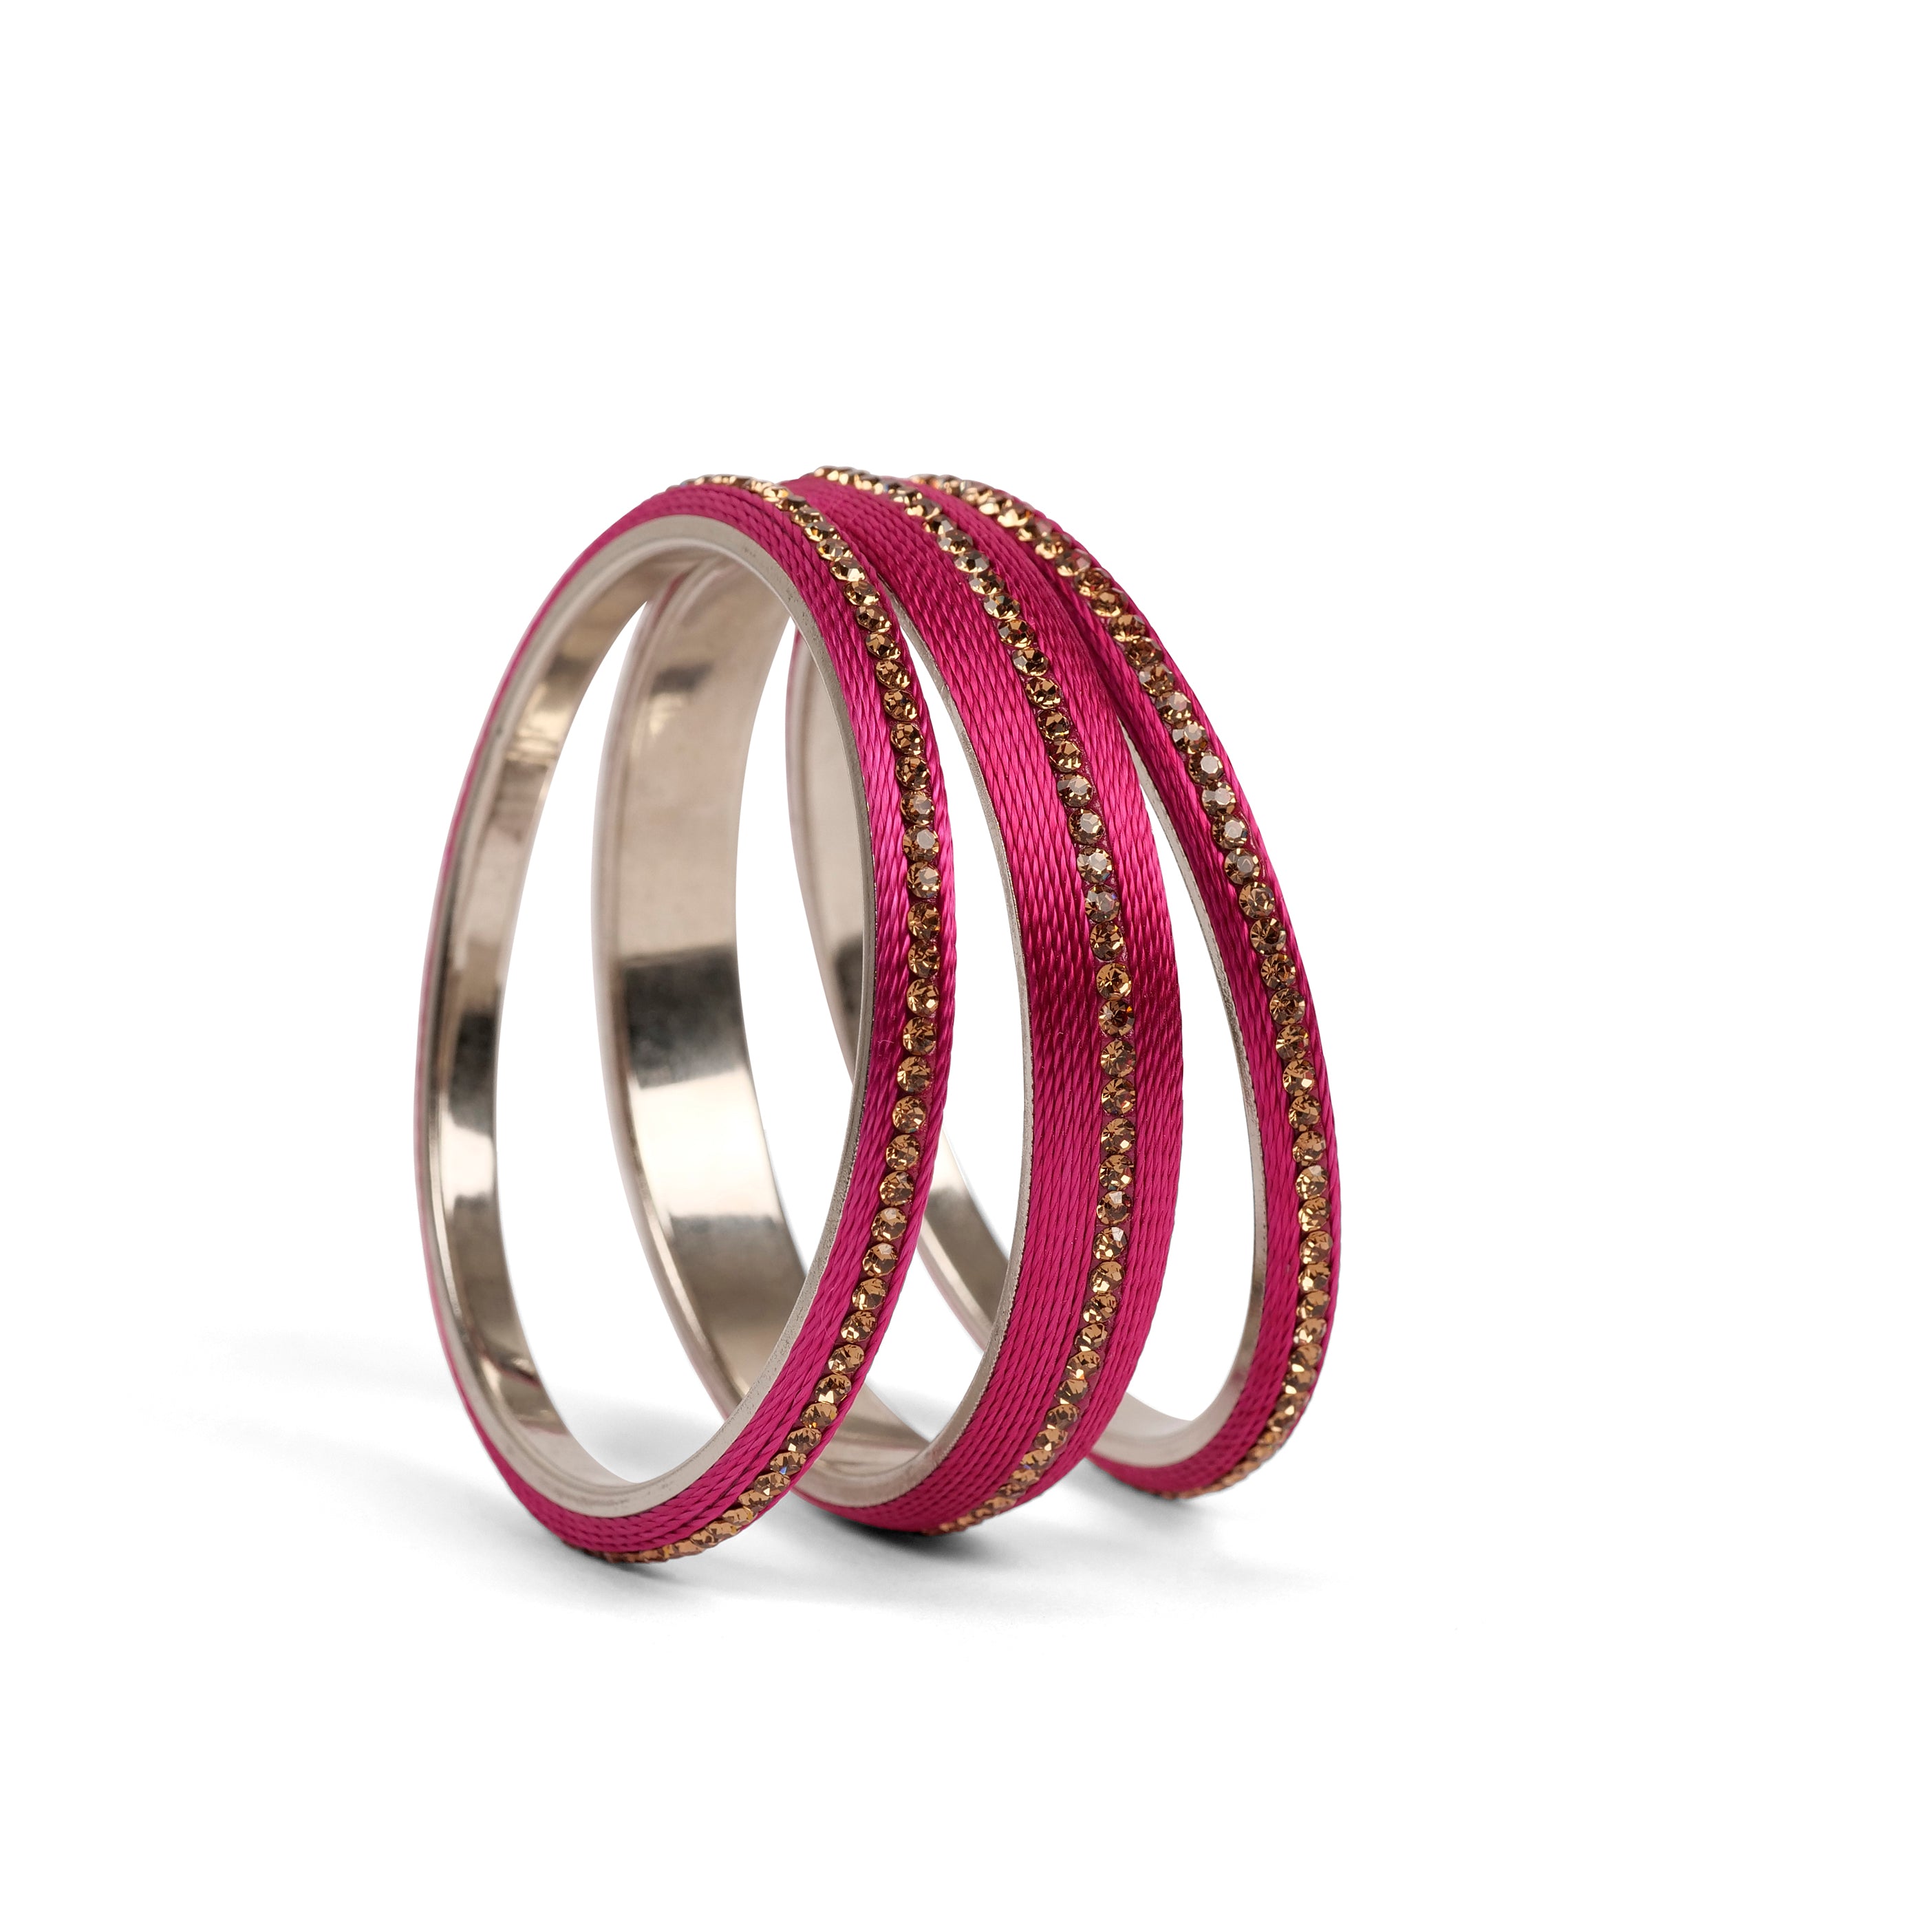 Set of 3 Thread Bangles in Pink